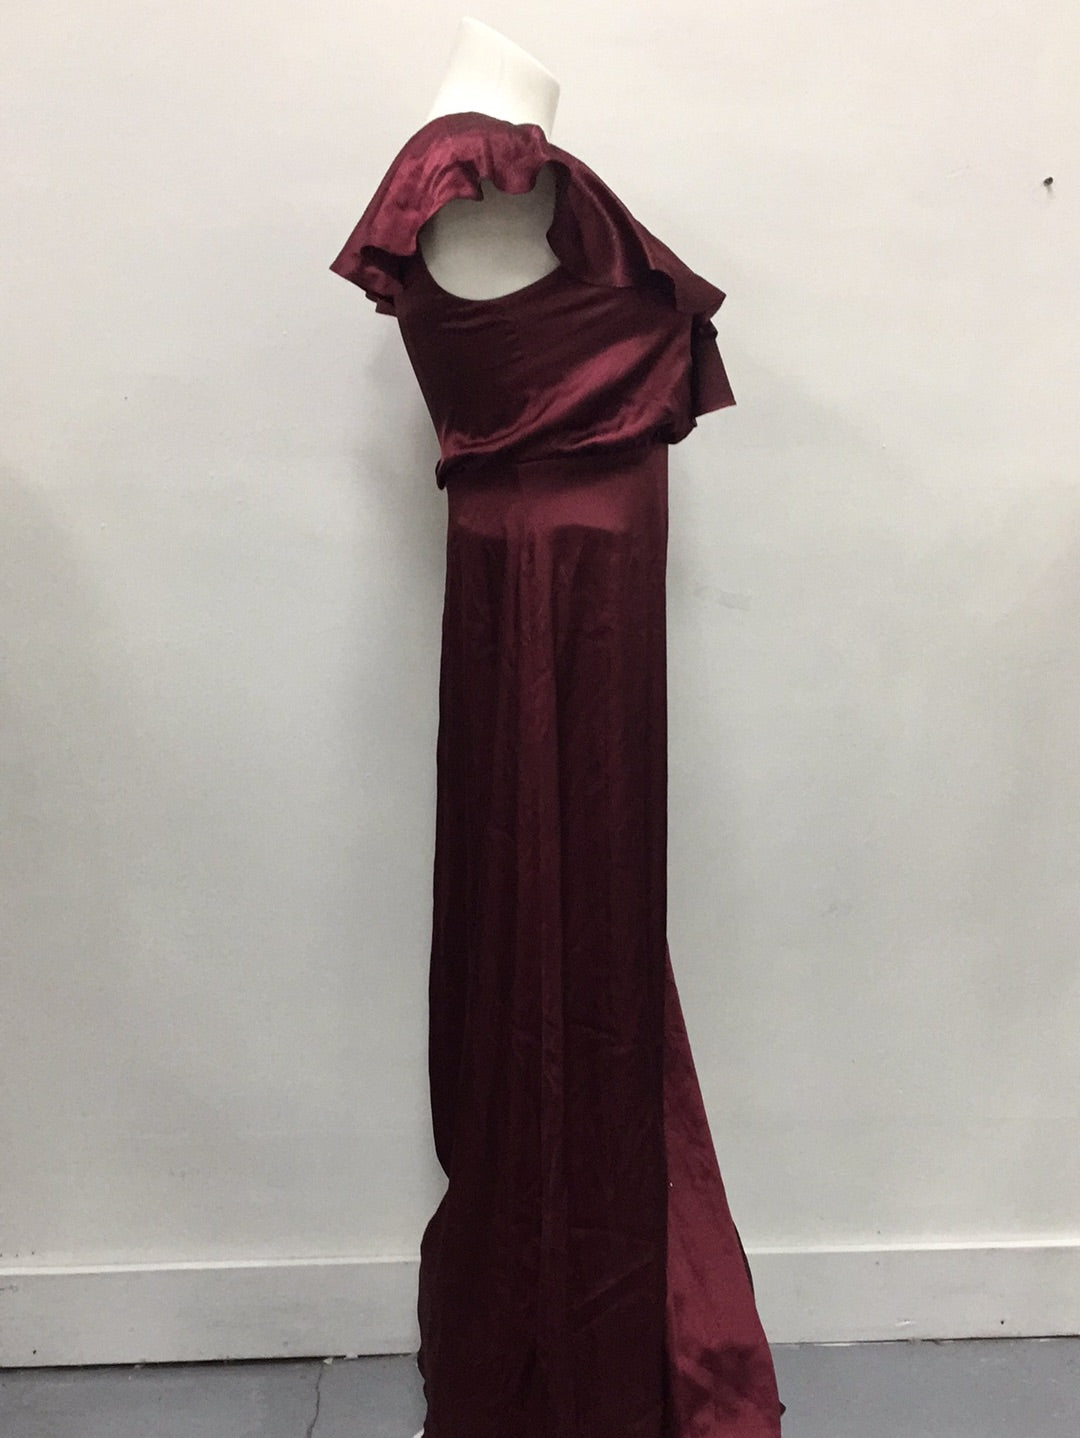 ADRIANNA PAPELL SILKY FLUTTER SLEEVE EVENING DRESS BURGUNDY 8 - NEW WITHOUT TAG 6063